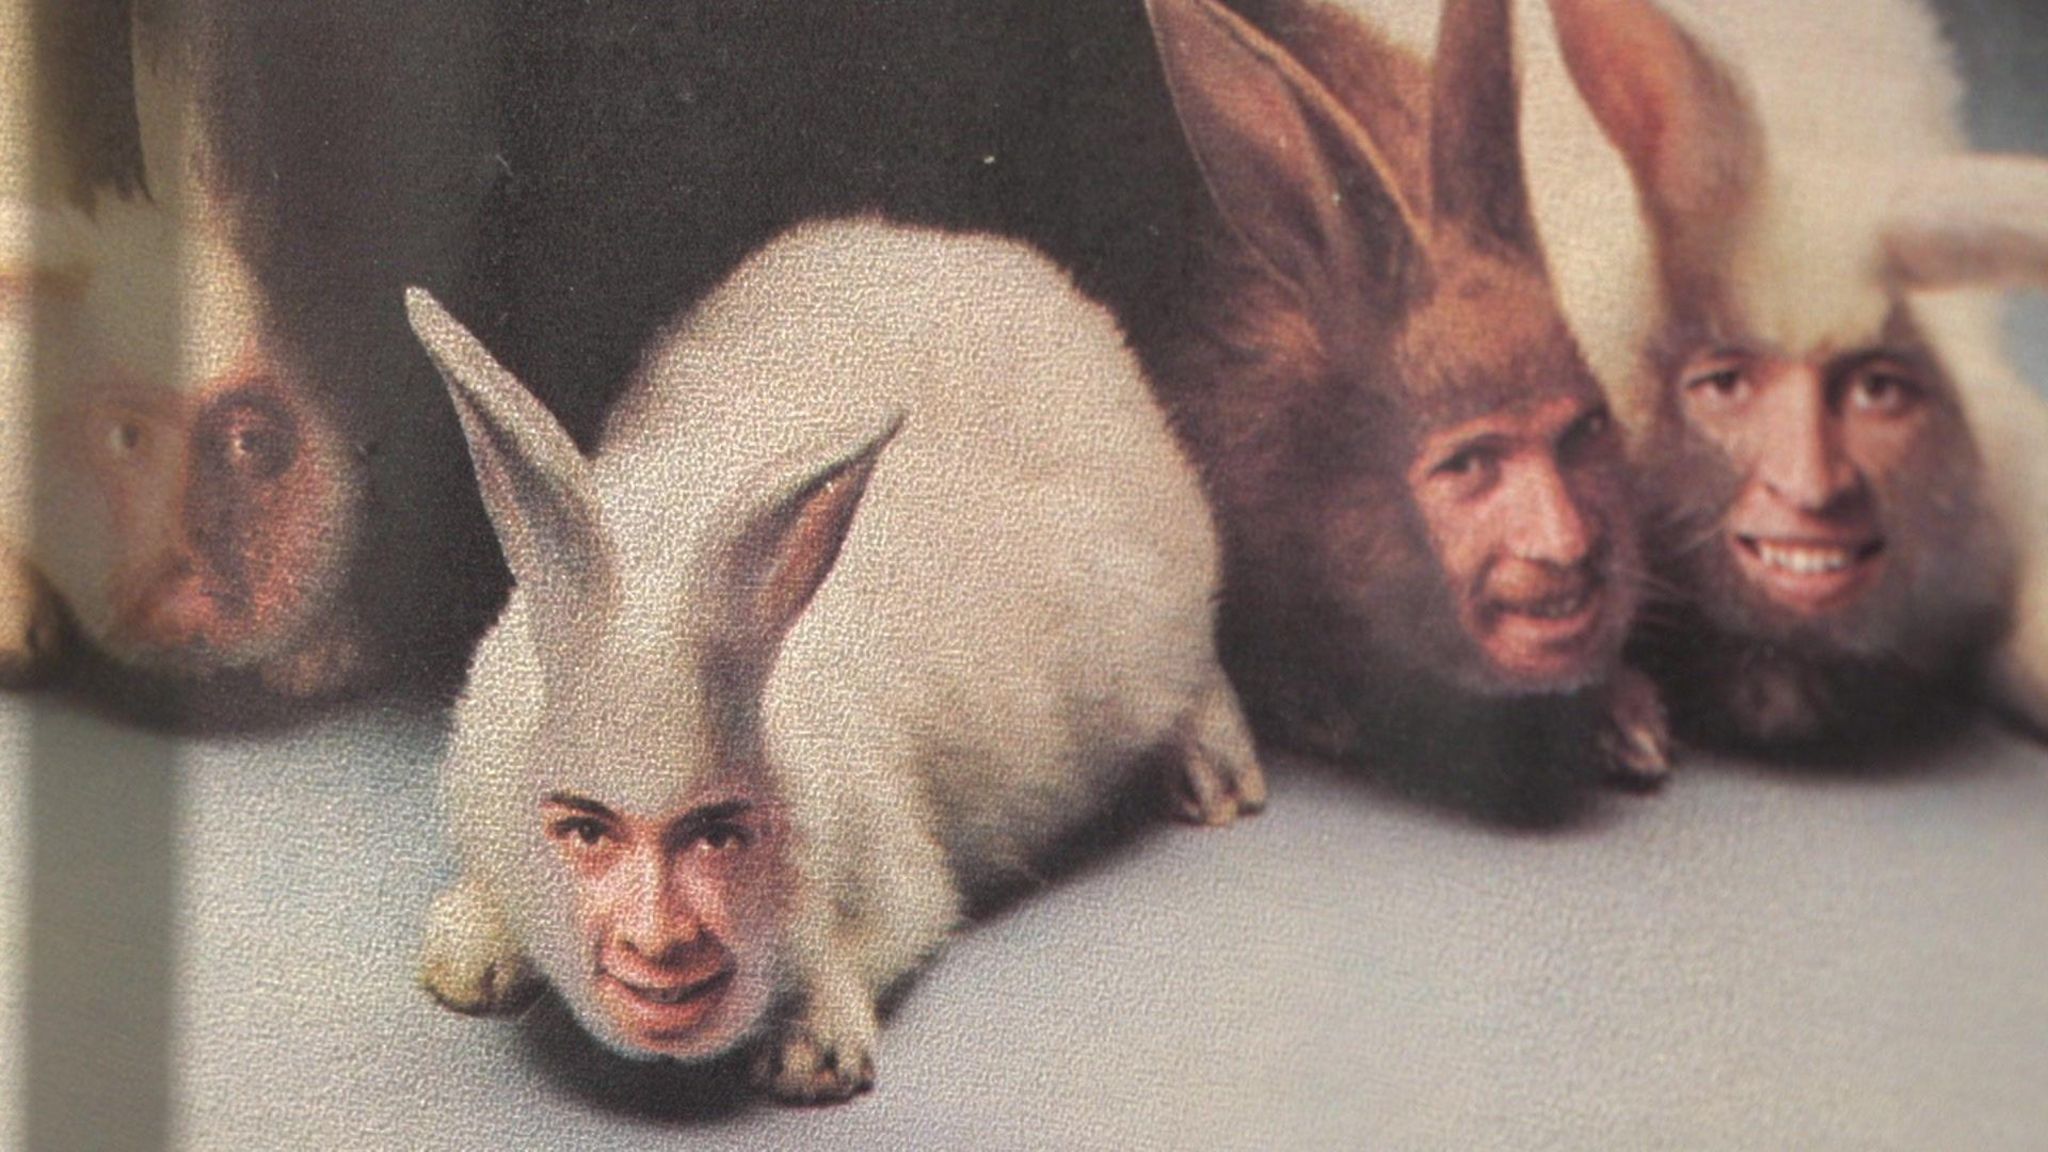 Rabbits with men's faces